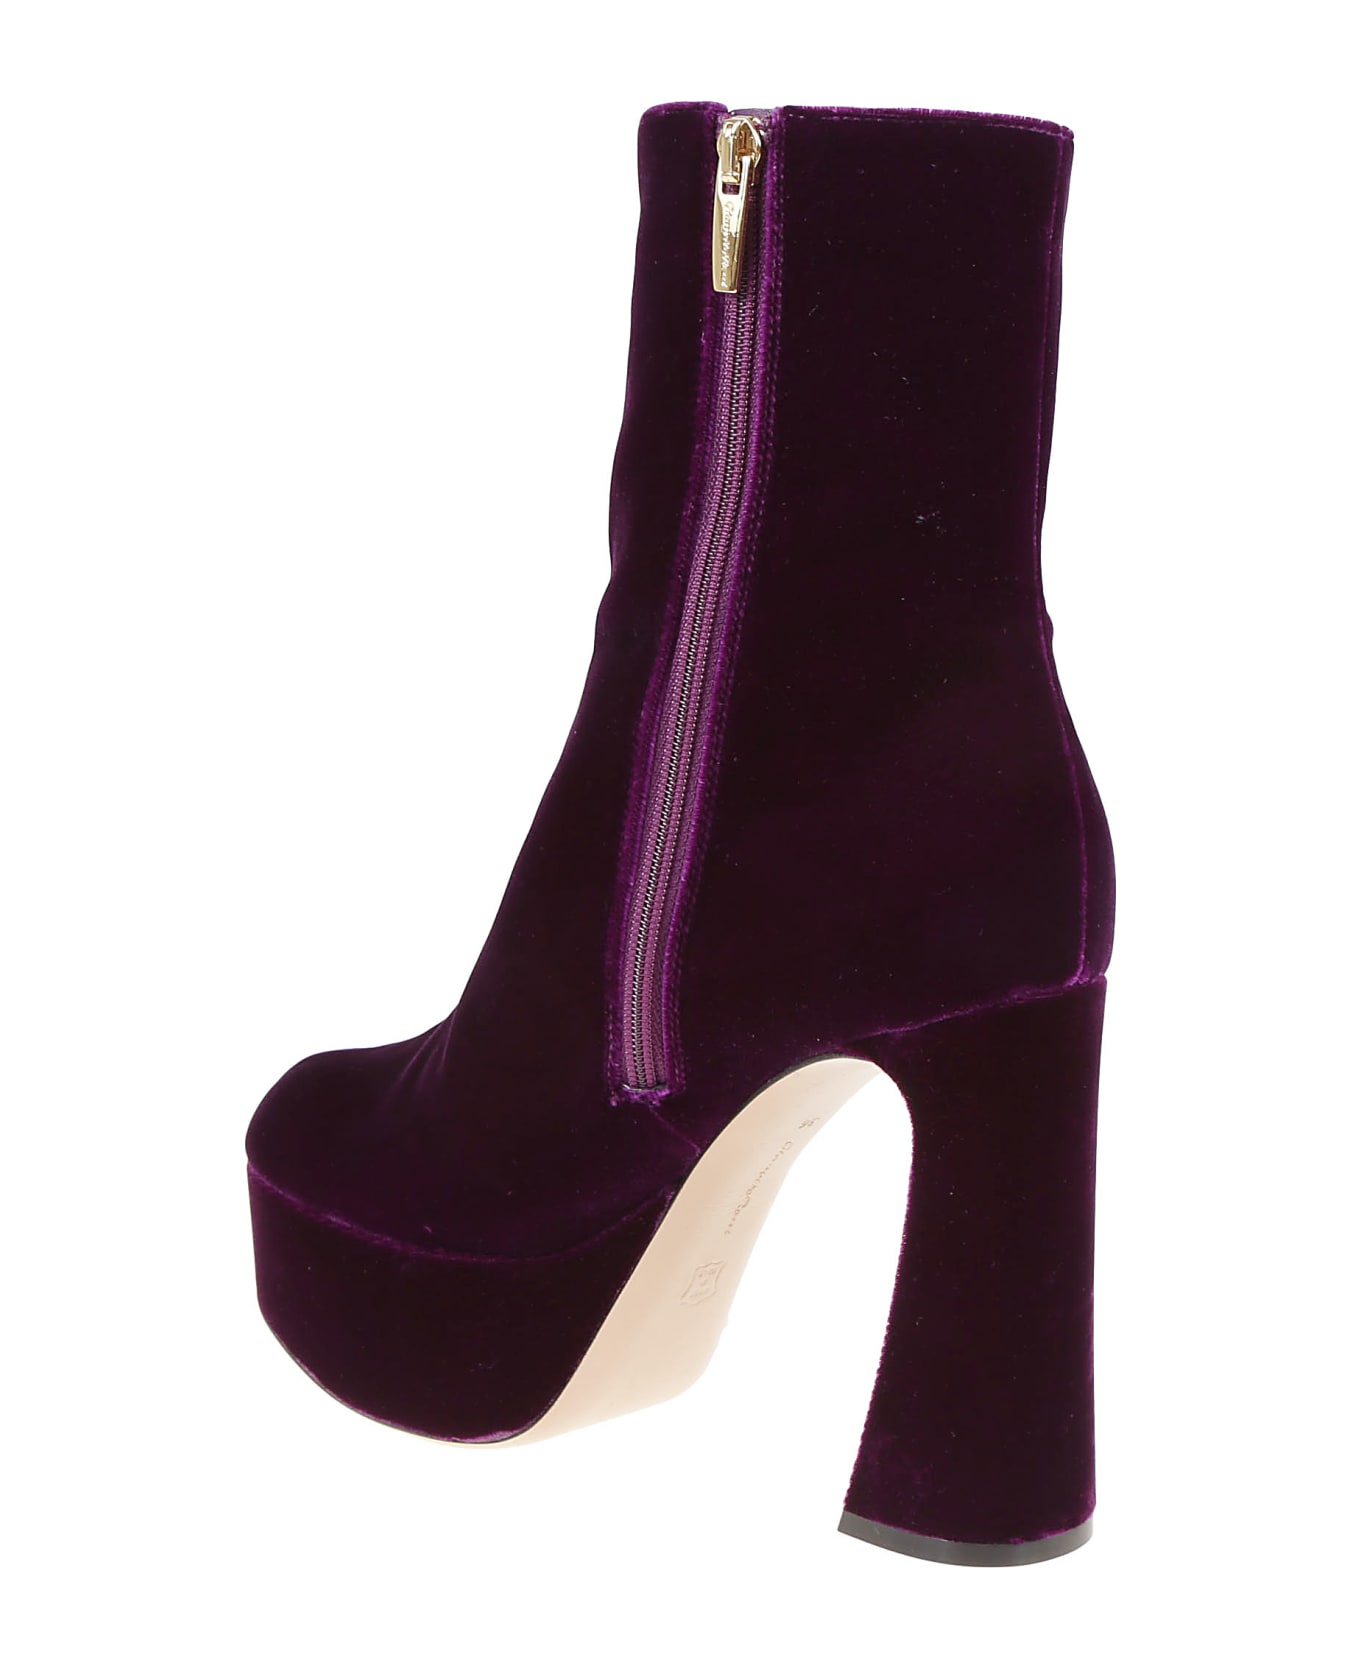 Gianvito Rossi Holly Bootie - Purp